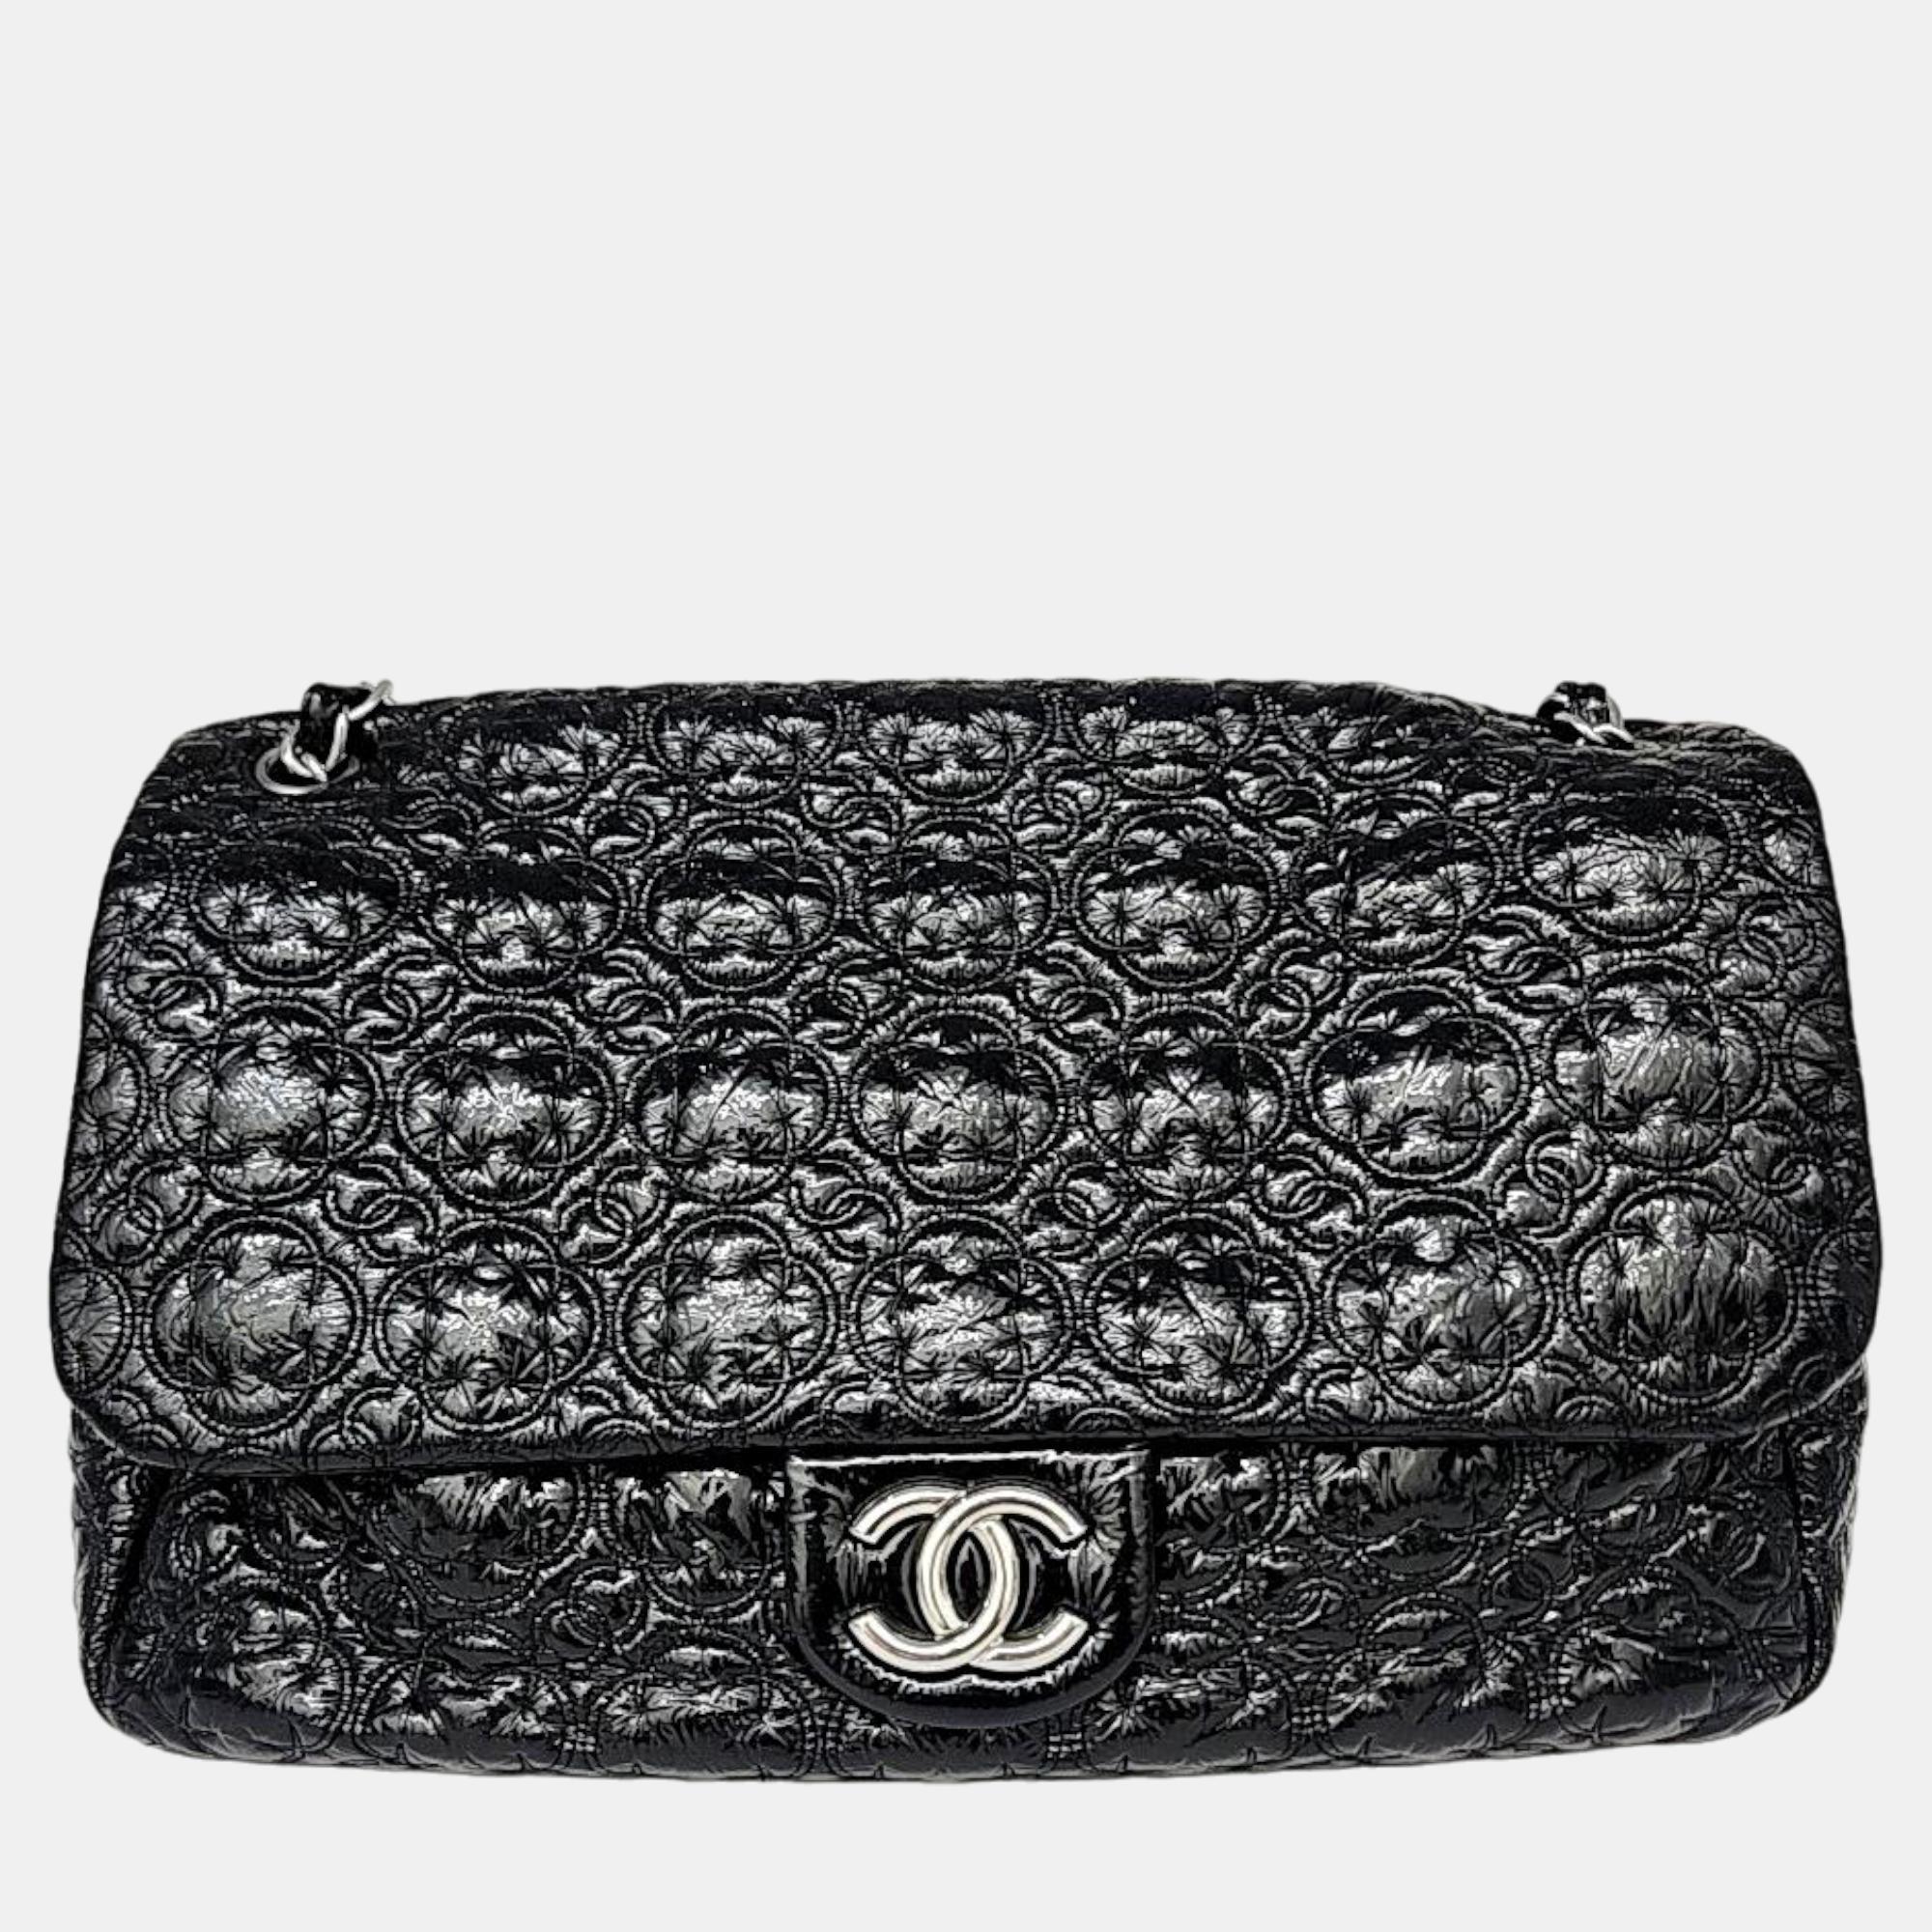 Chanel Black Patent Leather Paris-Moscou Rock In Moscou Flap Bag